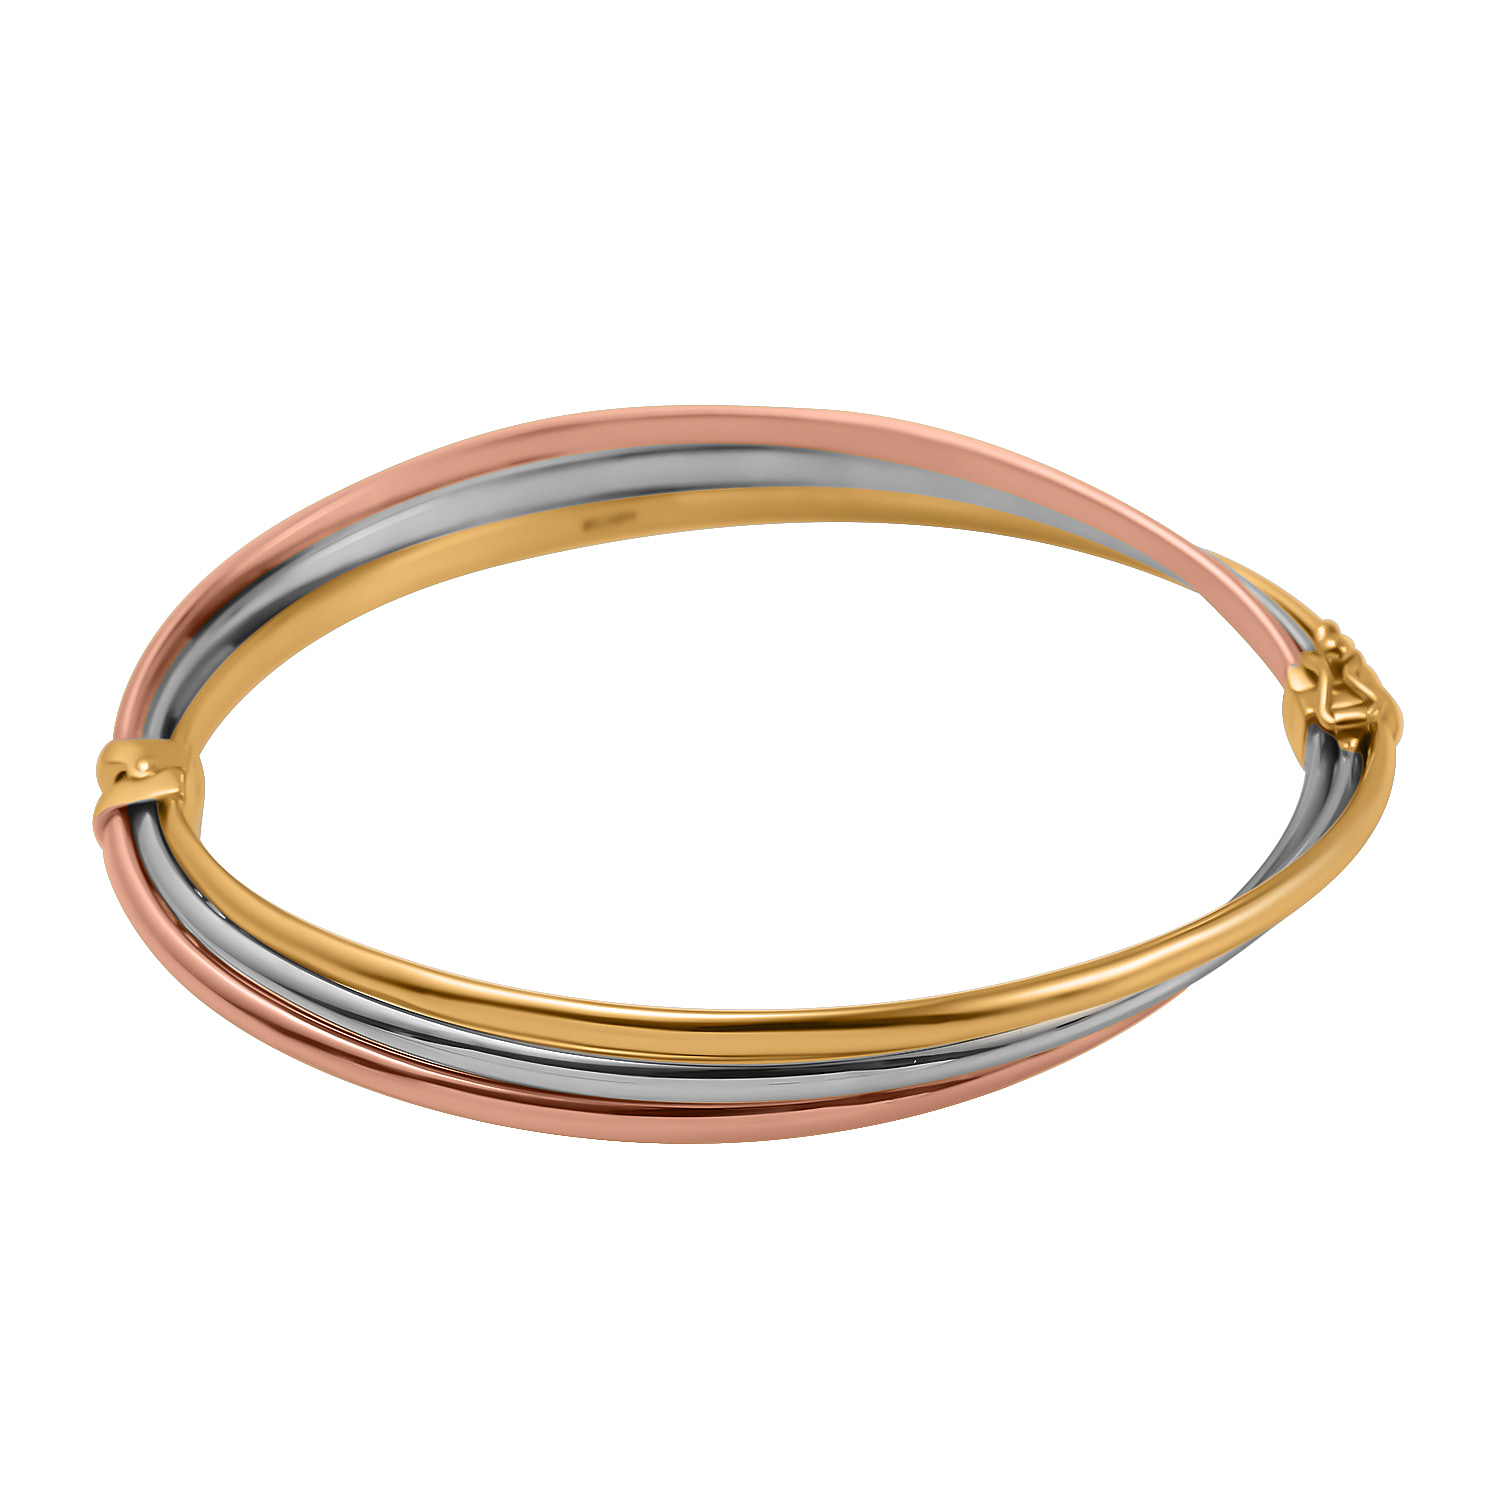 Italian Made - 9K Rose, Yellow and White Gold Trio Bangle (Size 7), Gold Wt. 6.70 Gms